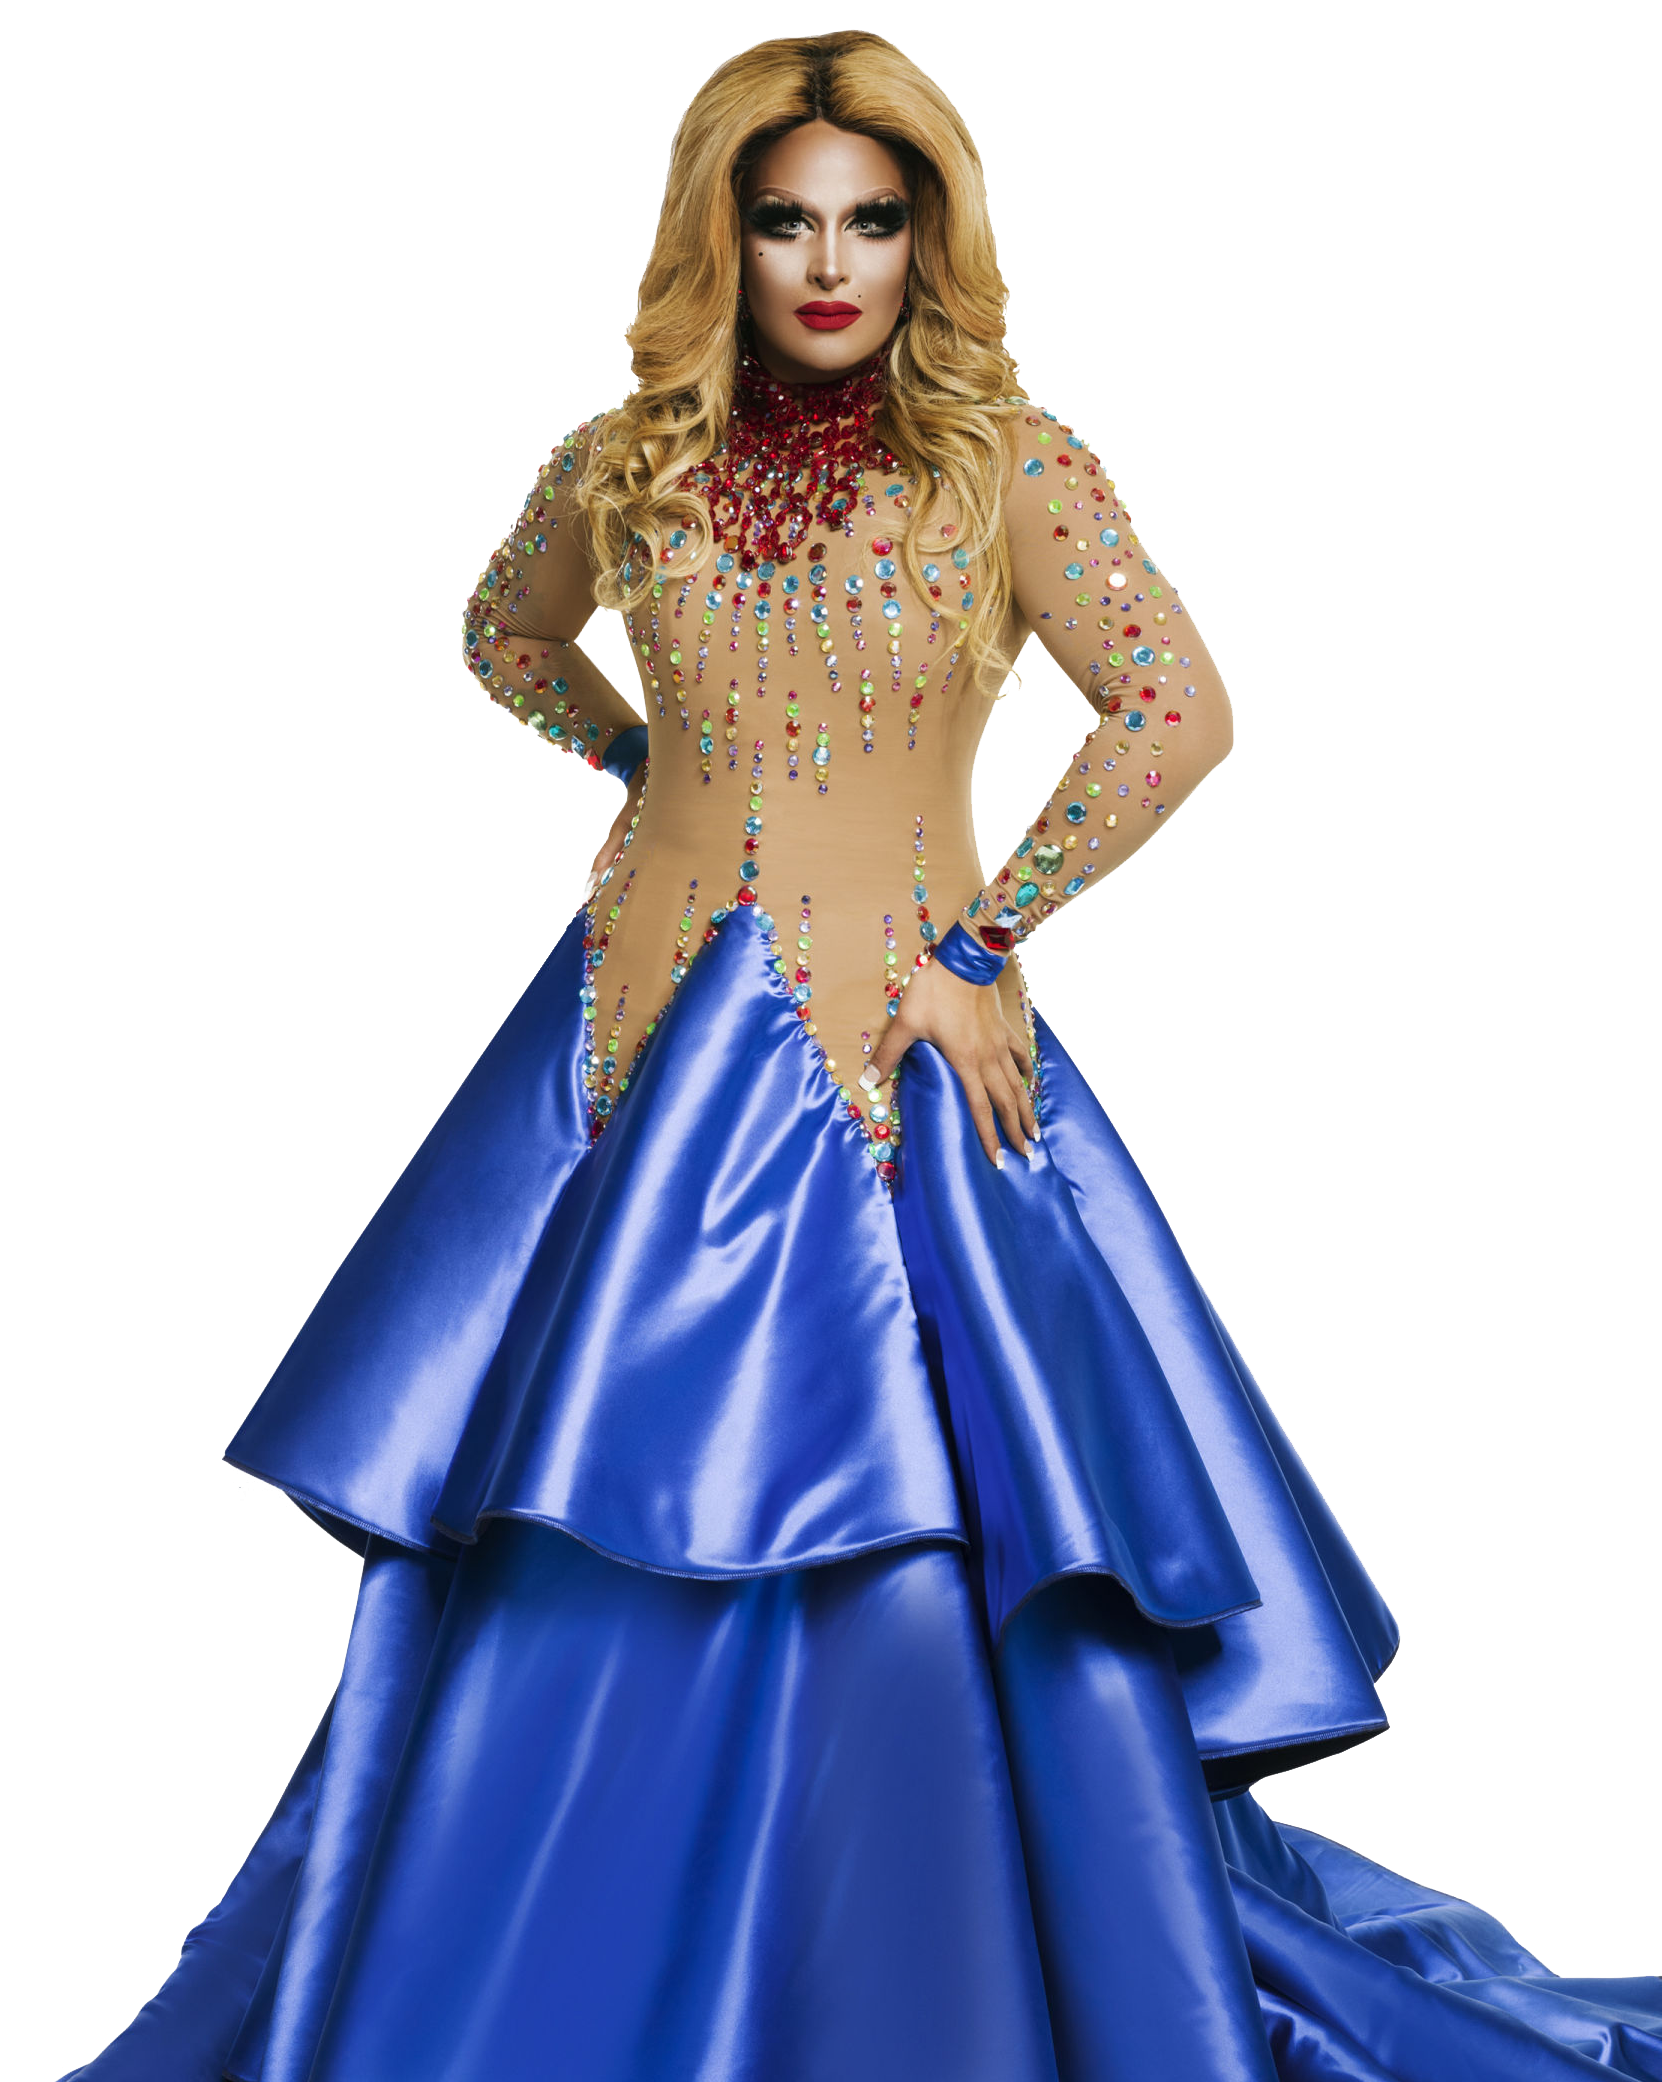 roxxxy-andrews-png-by-maarcopngs-on-deviantart